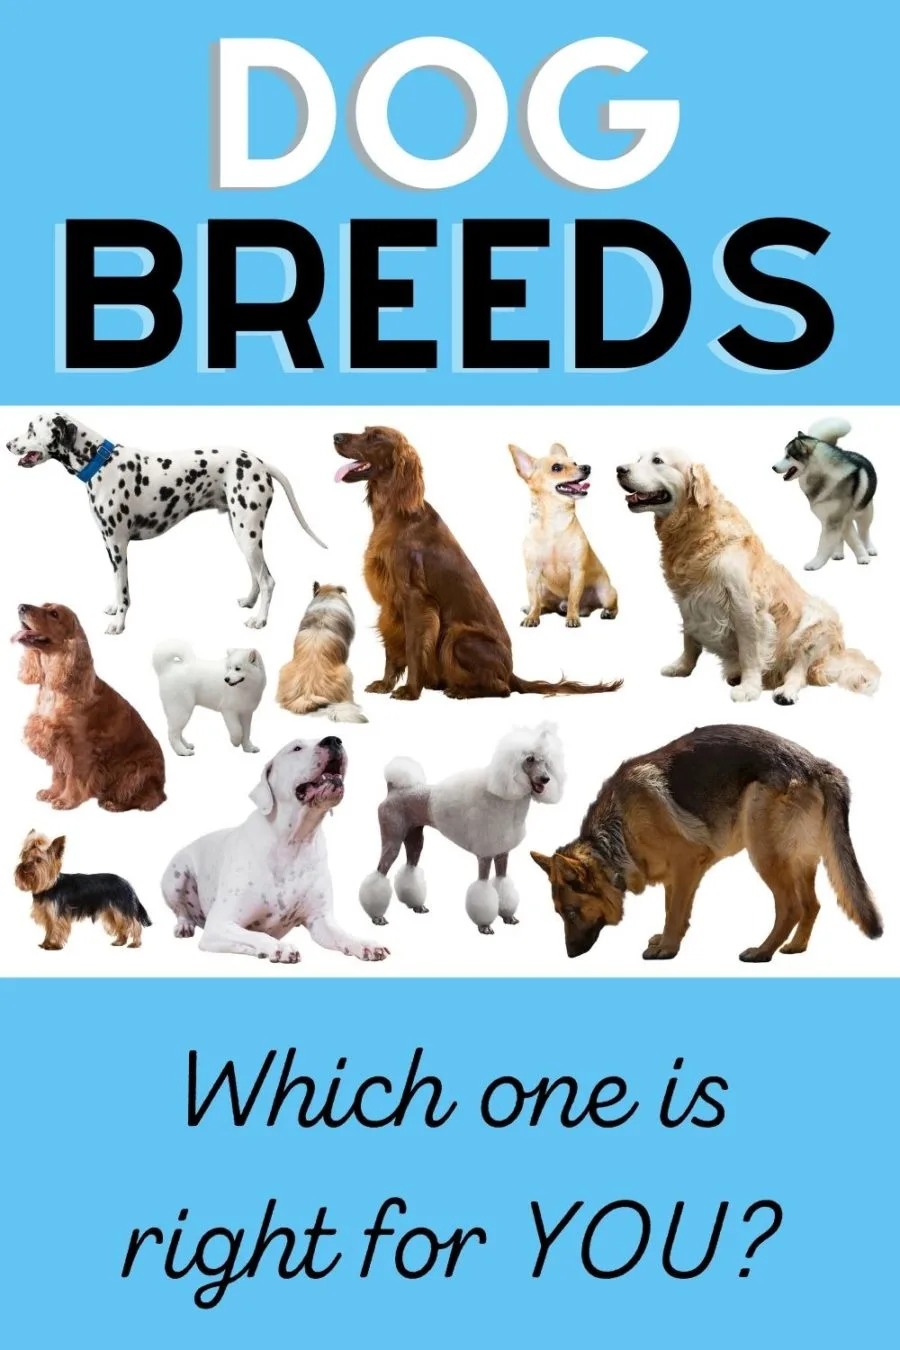 Dog breeds - which one is right for you?